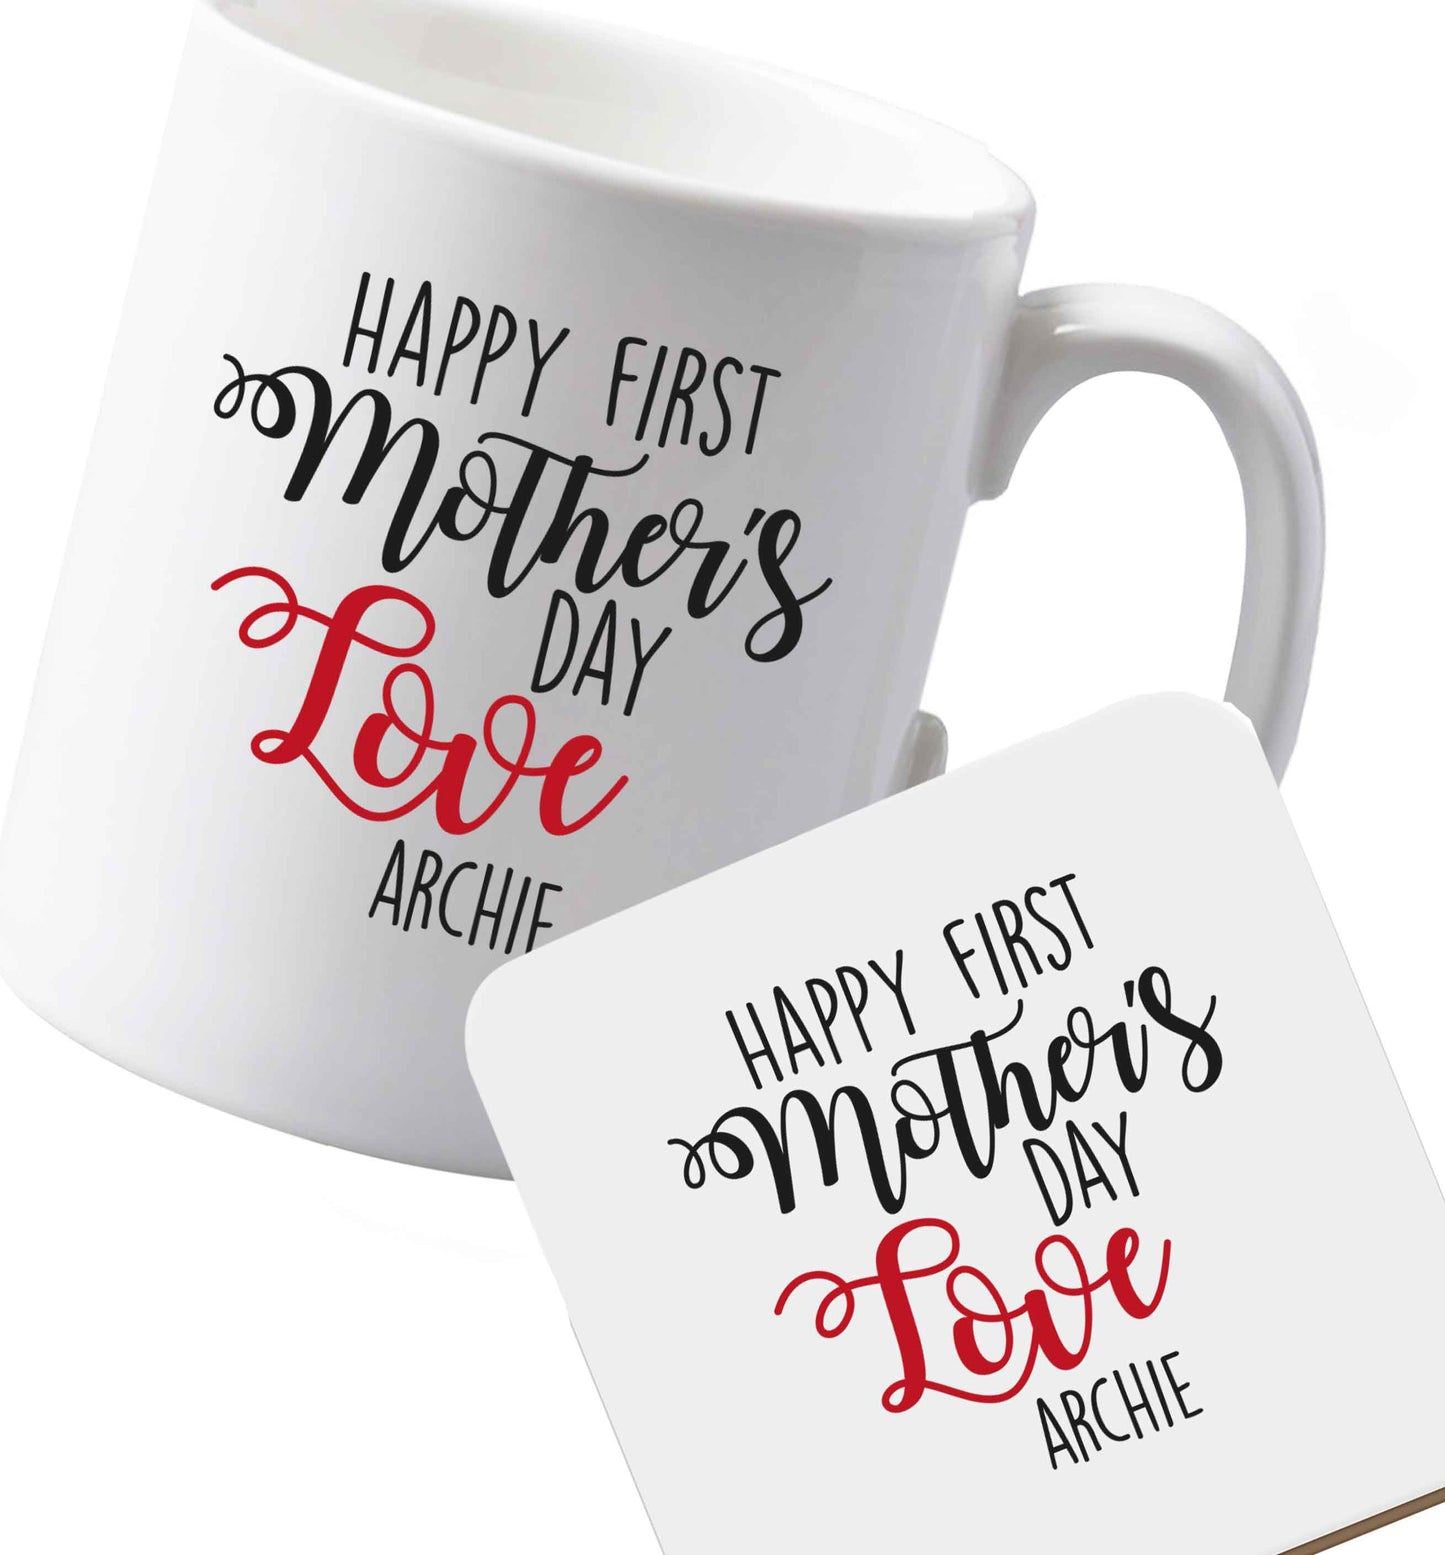 10 oz Ceramic mug and coaster Personalised happy first mother's day love both sides